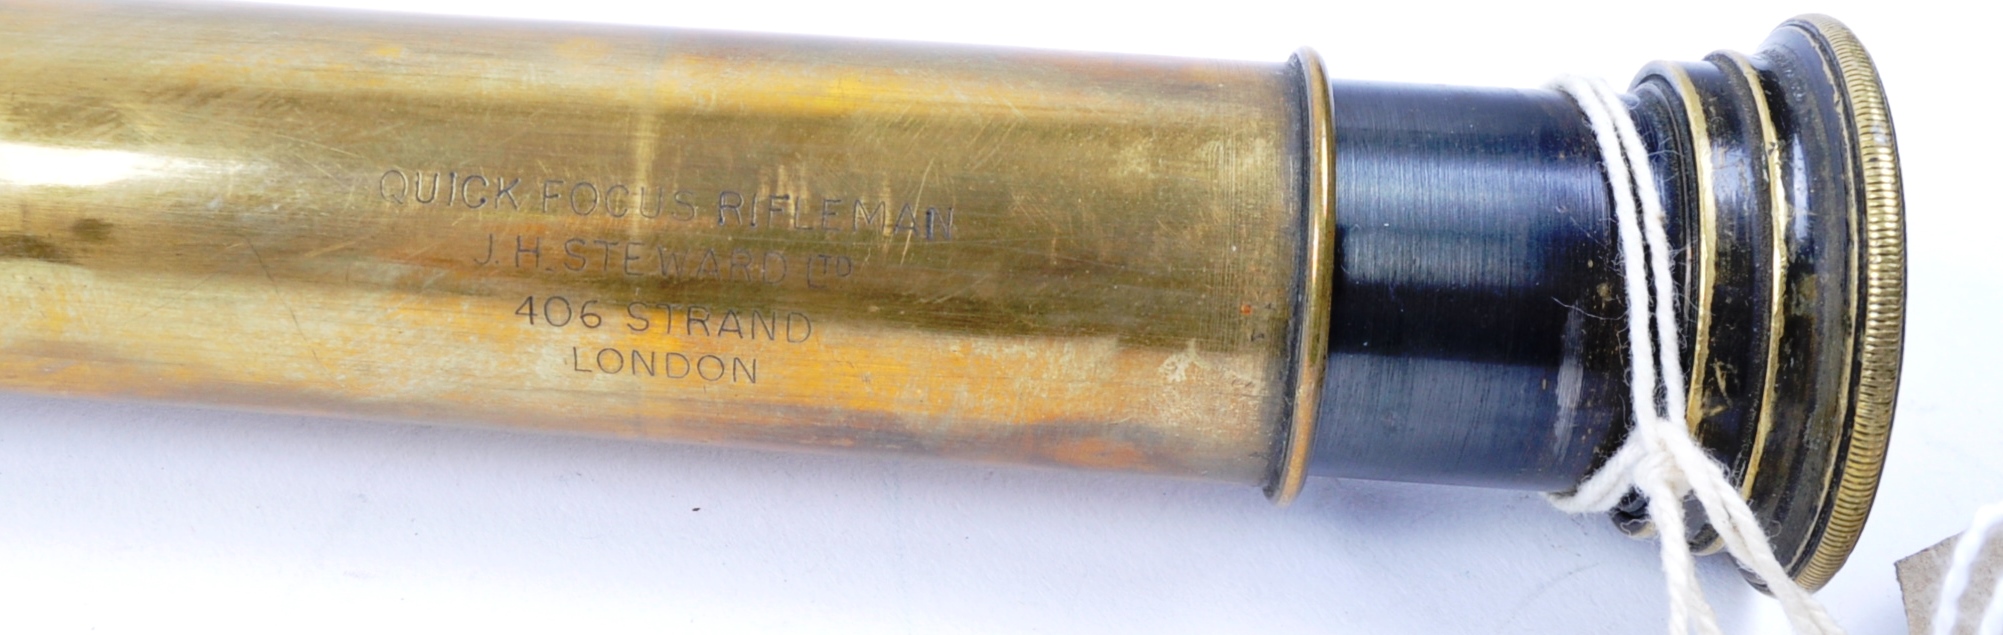 EARLY 20TH CENTURY J H STEWARD 3 DRAW RIFLEMAN QUICK FOCUS TELECOPE - Image 2 of 5